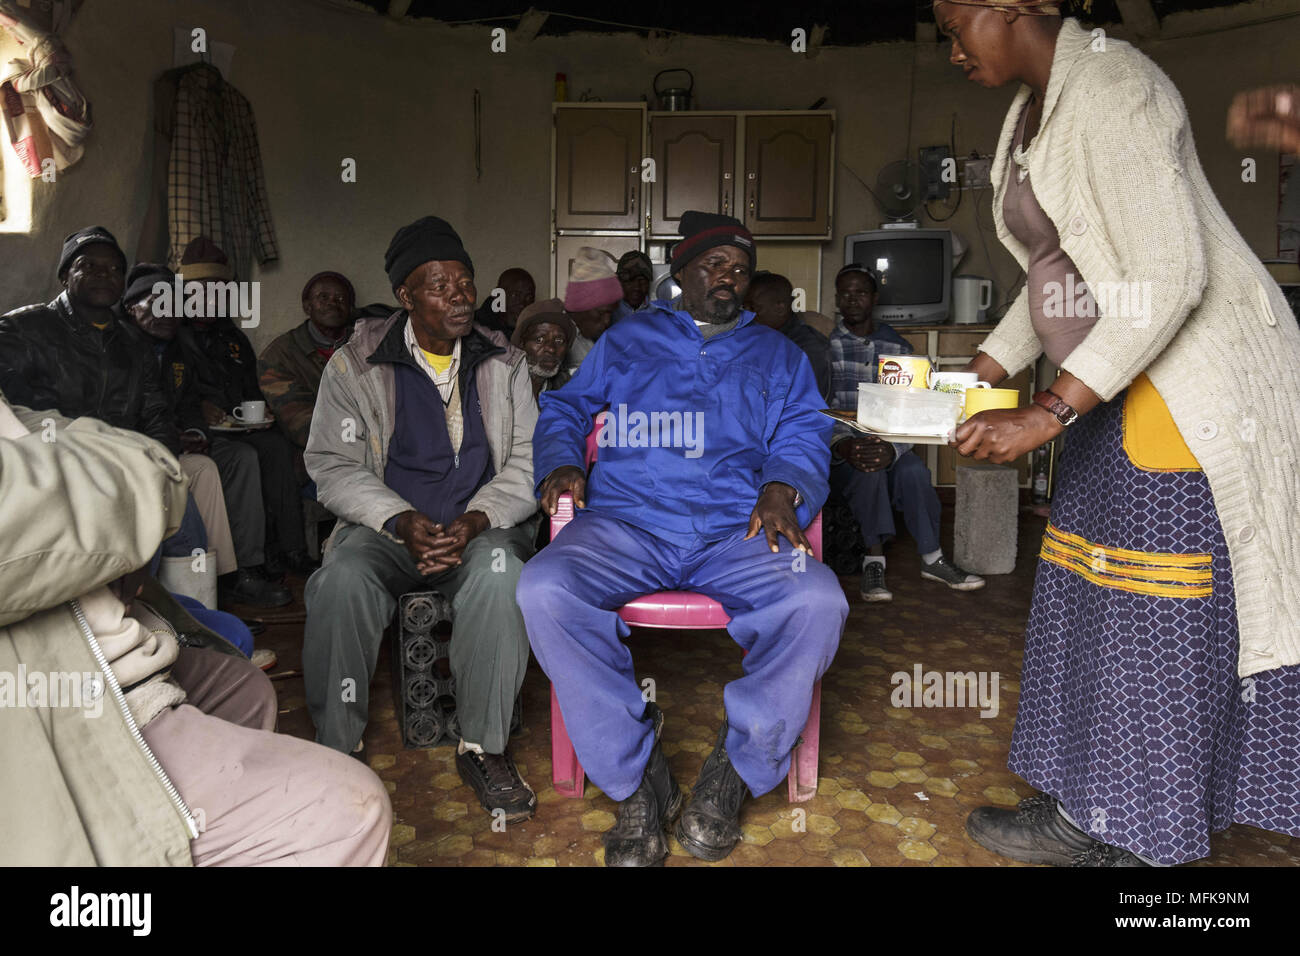 Matatiele, Eastern Cape, South Africa. 5th Dec, 2017. Xhosa men attend an initiation ceremony and women serve coca cola, coffee and small snacks. Credit: Stefan Kleinowitz/ZUMA Wire/Alamy Live News Stock Photo